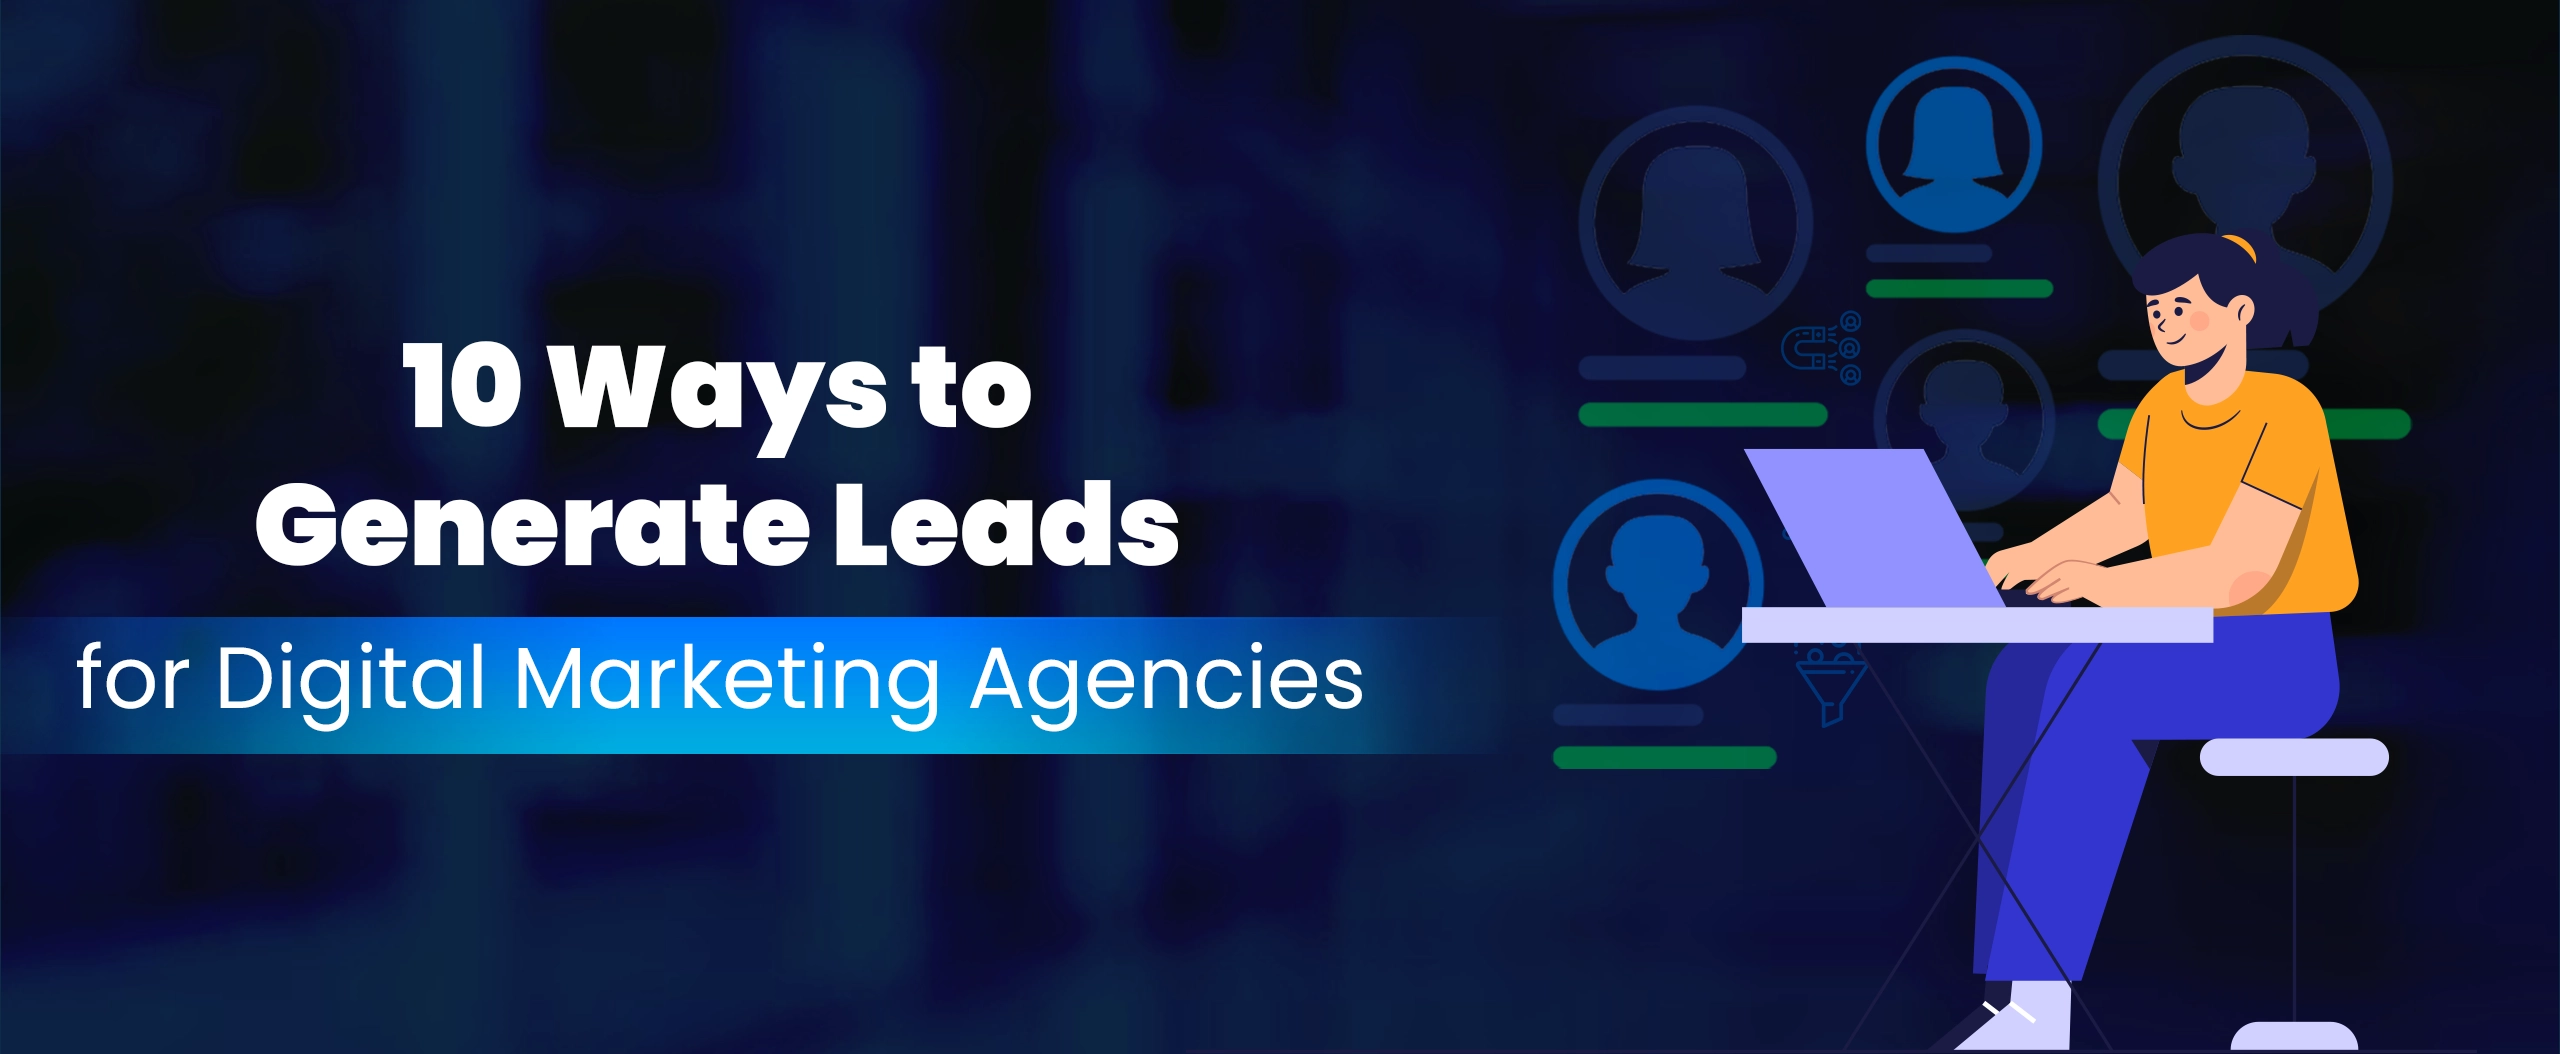 10-Ways-to-Generate-Leads-for-Digital-Marketing-Agencies-final